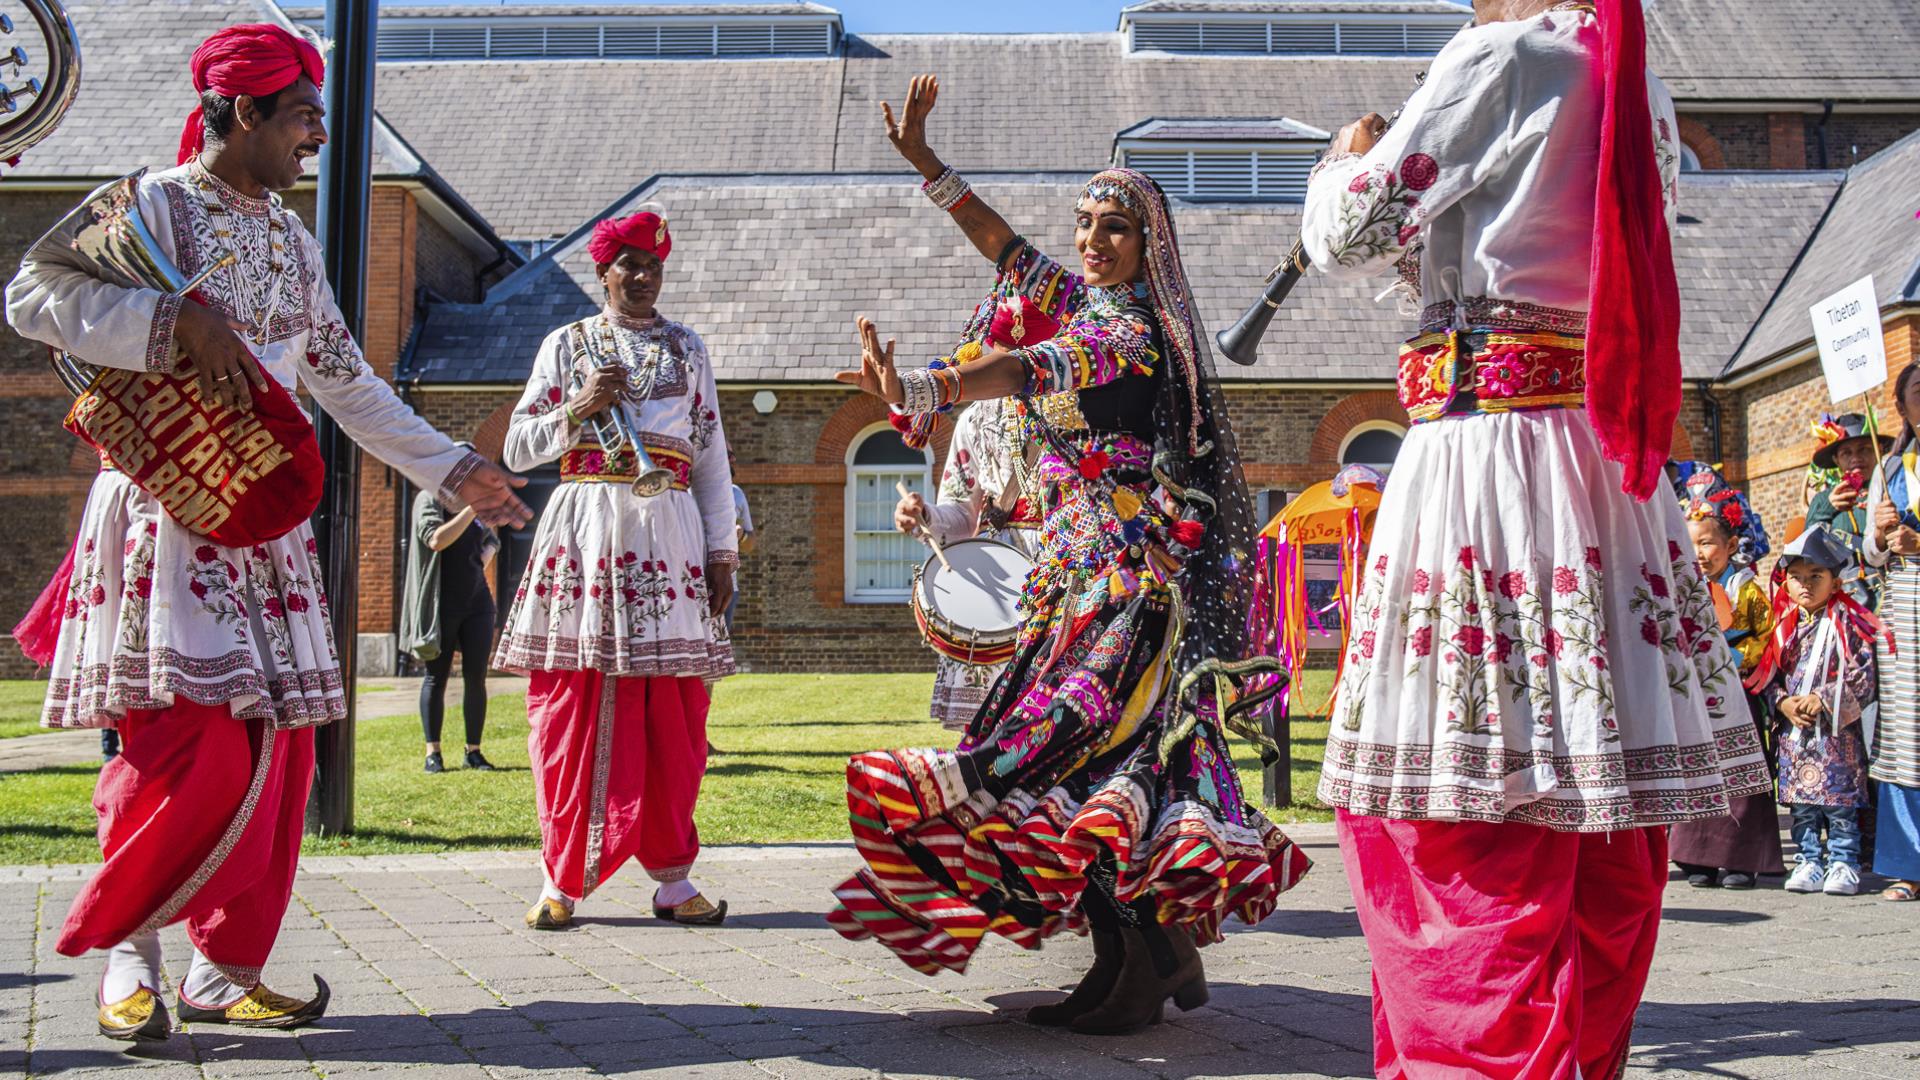 A woman dances in traditional dress at Woolwich Carnival in Greenwich.